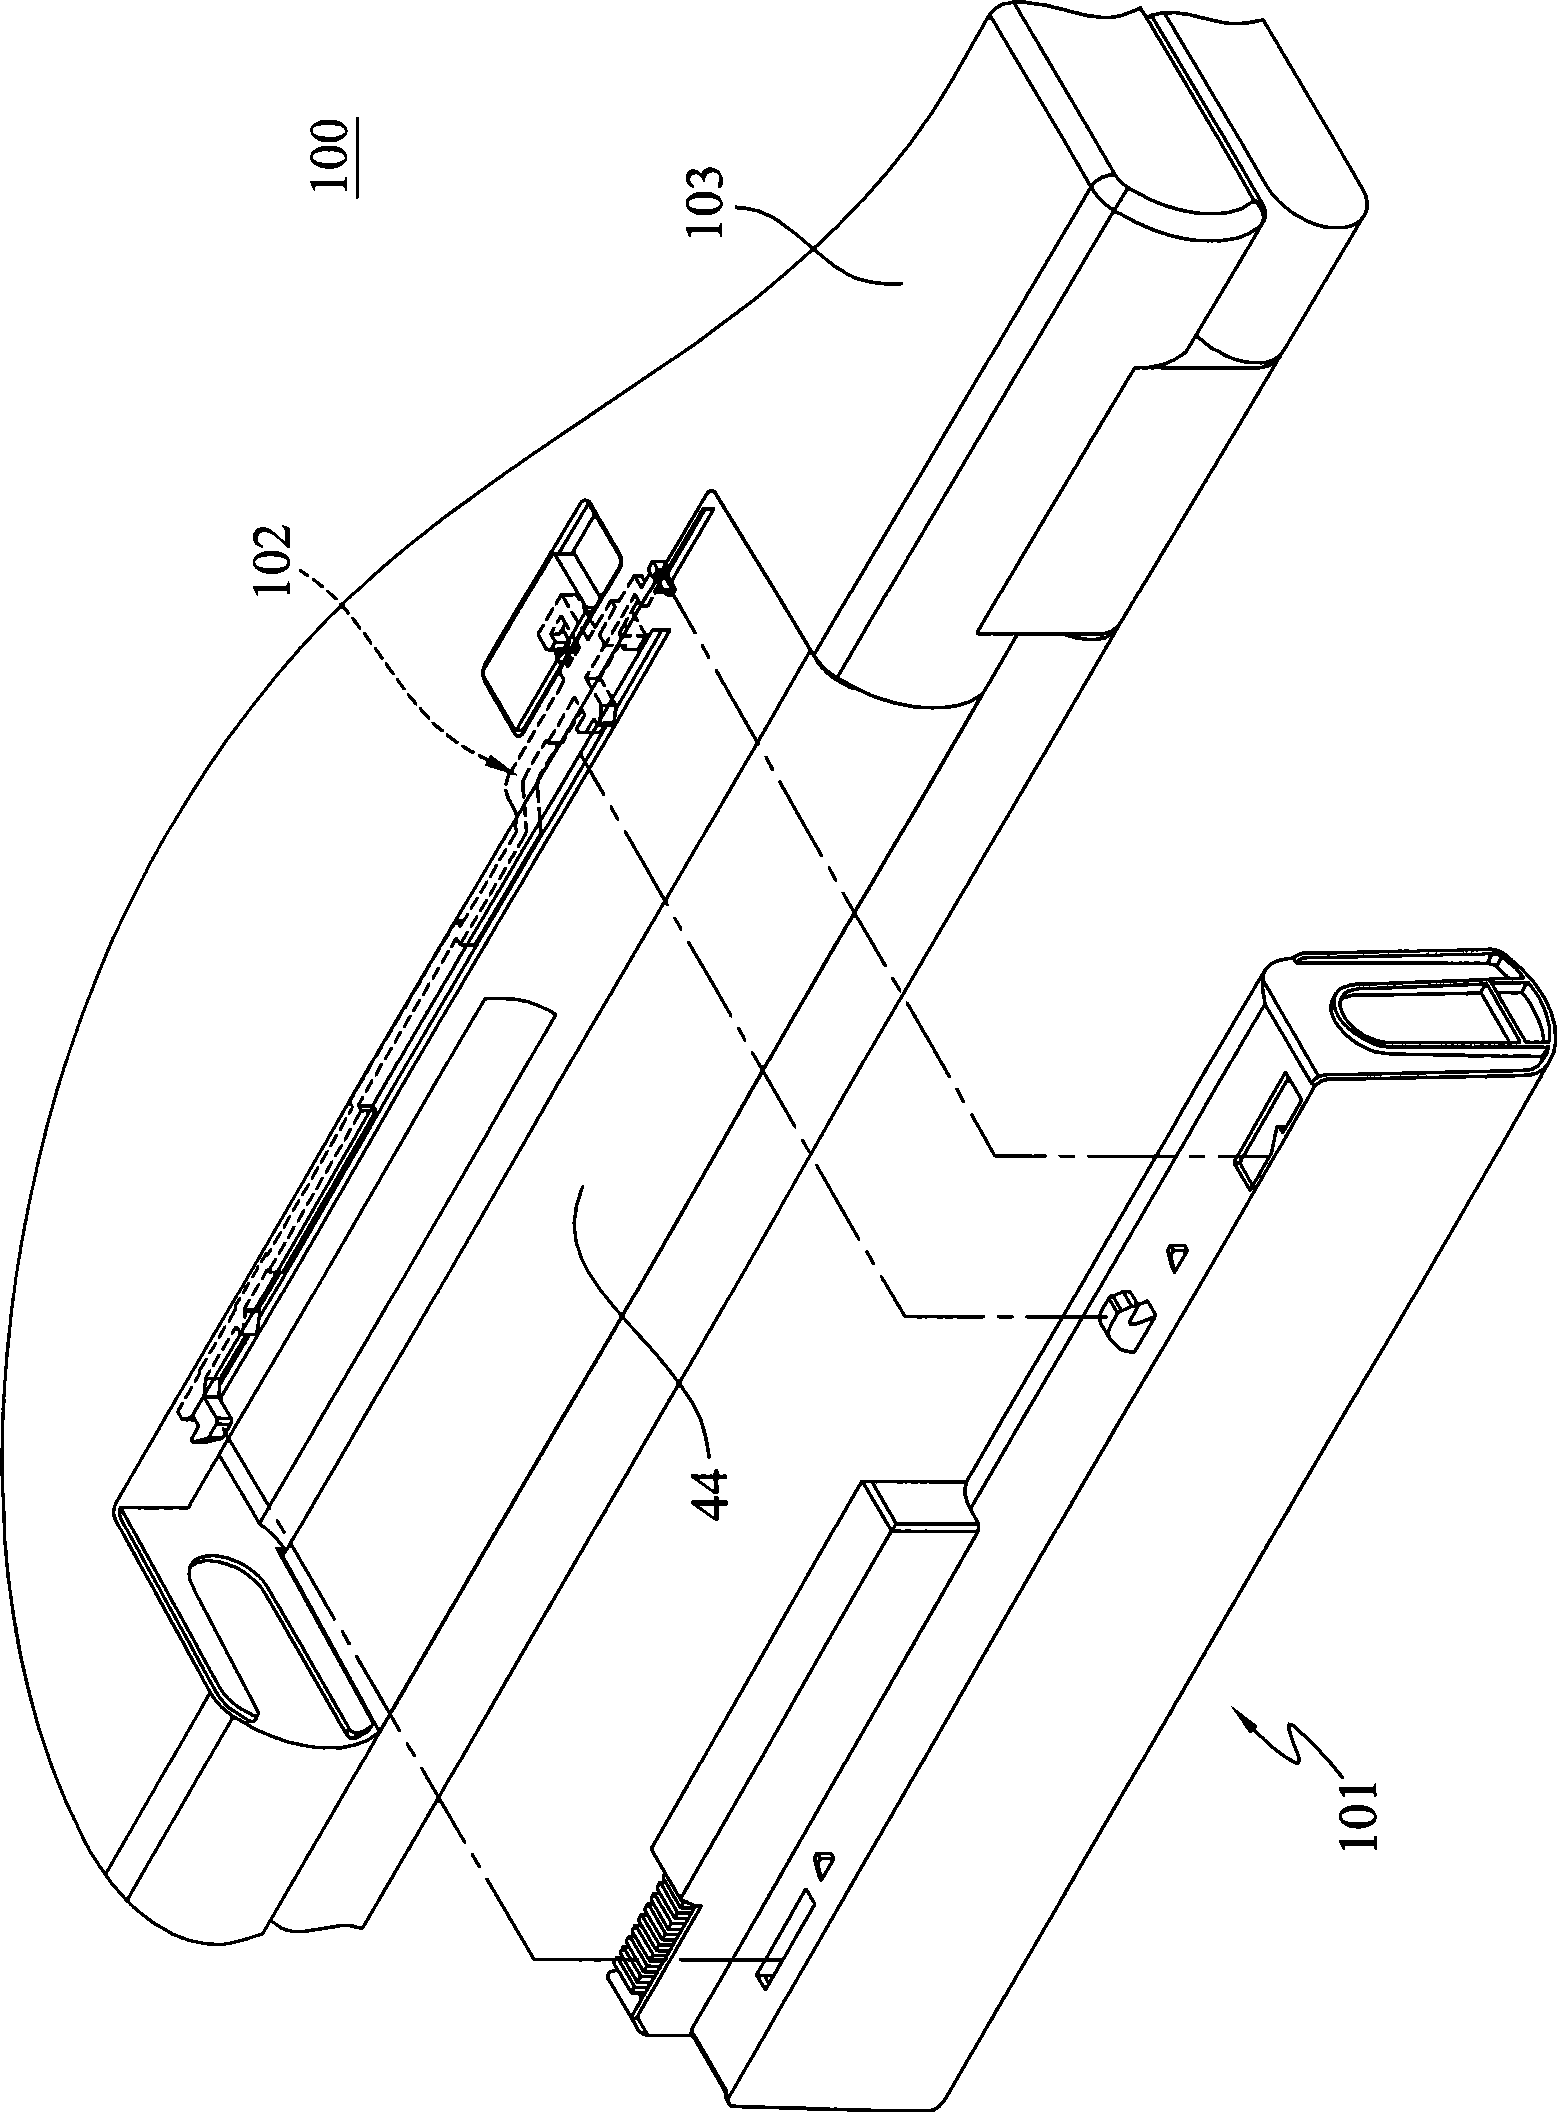 Electronic device with locking battery module structure